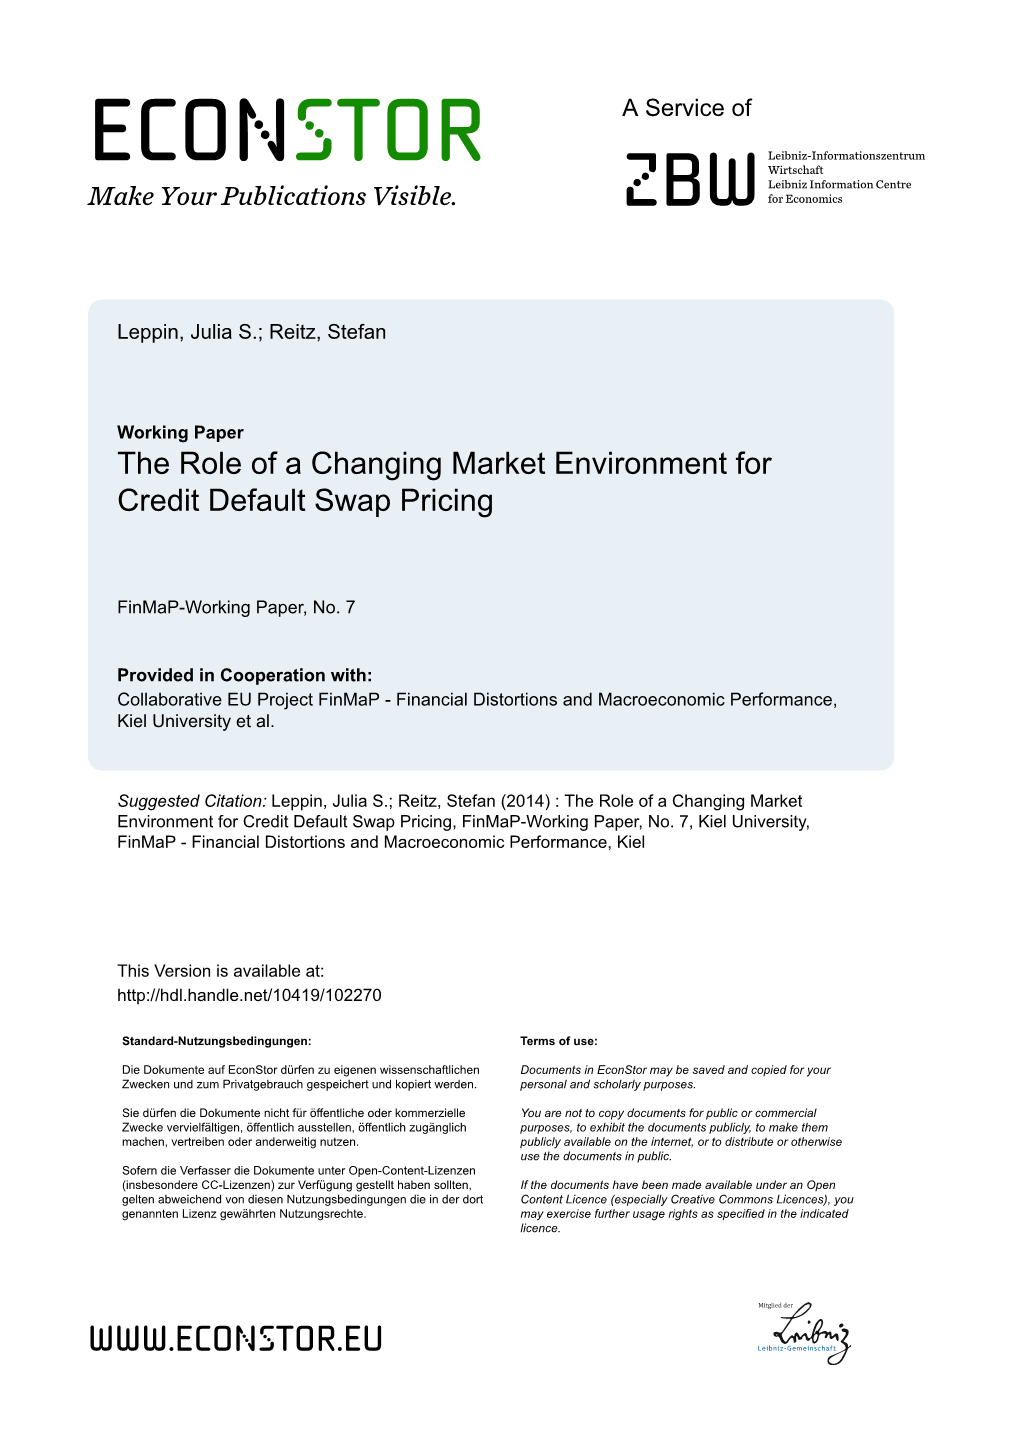 The Role of a Changing Market Environment for Credit Default Swap Pricing